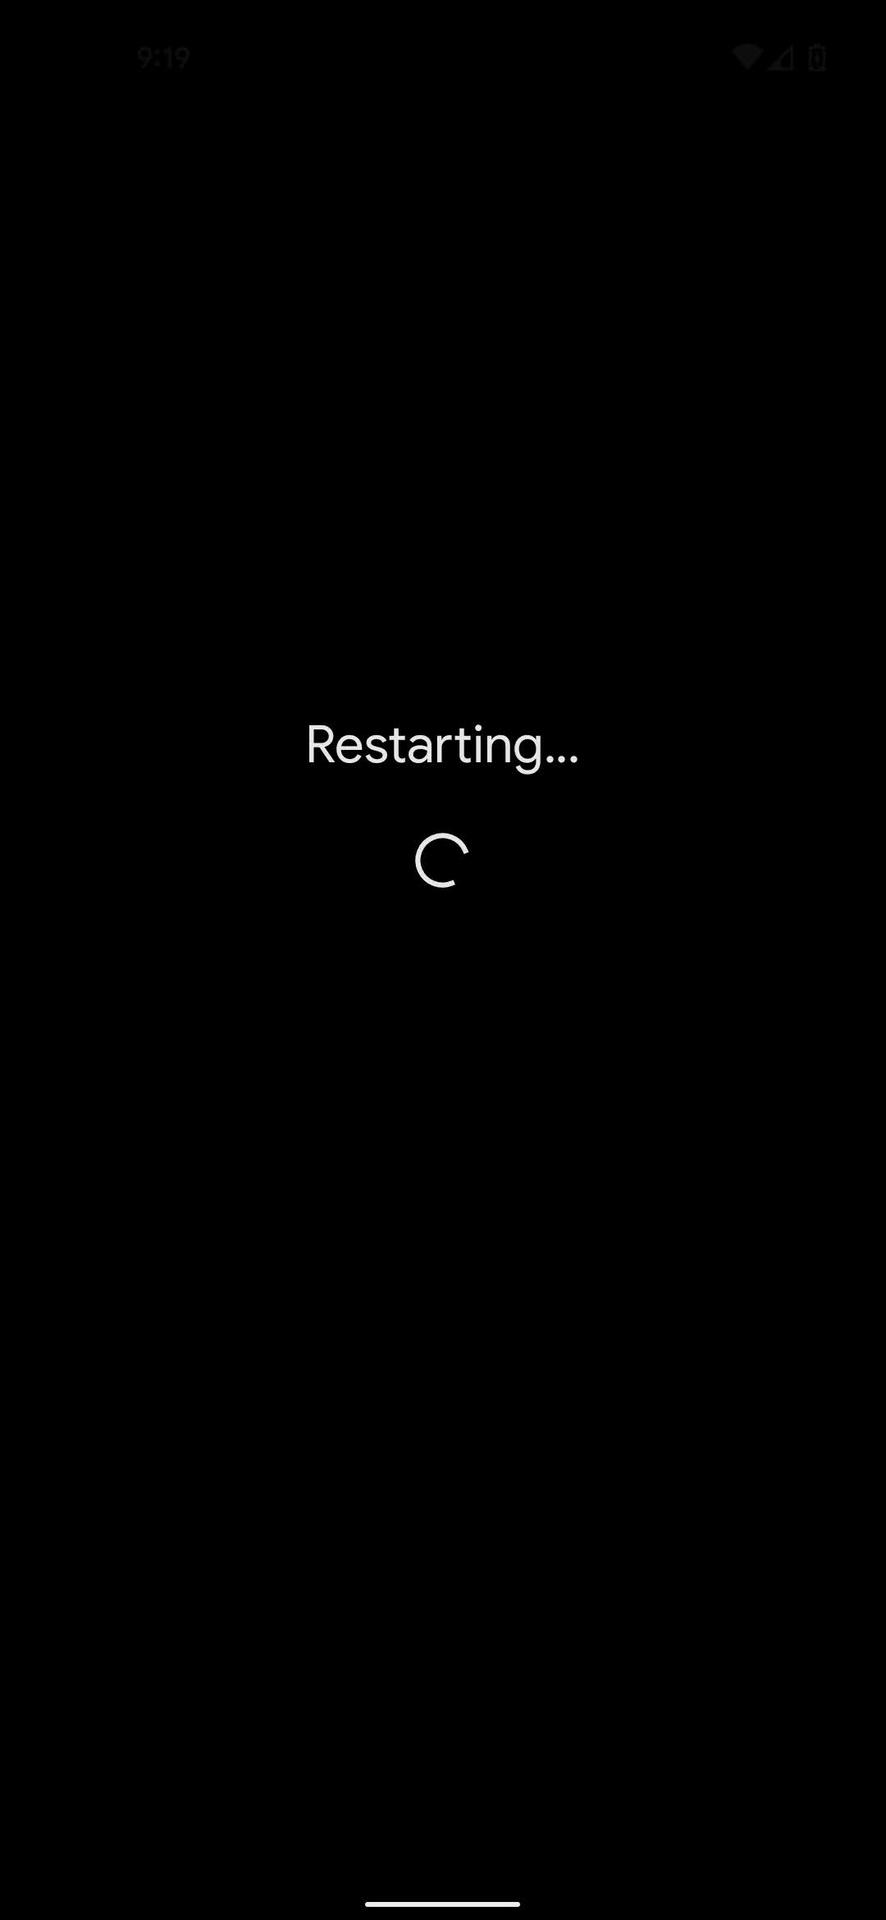 How to restart Android phone 2